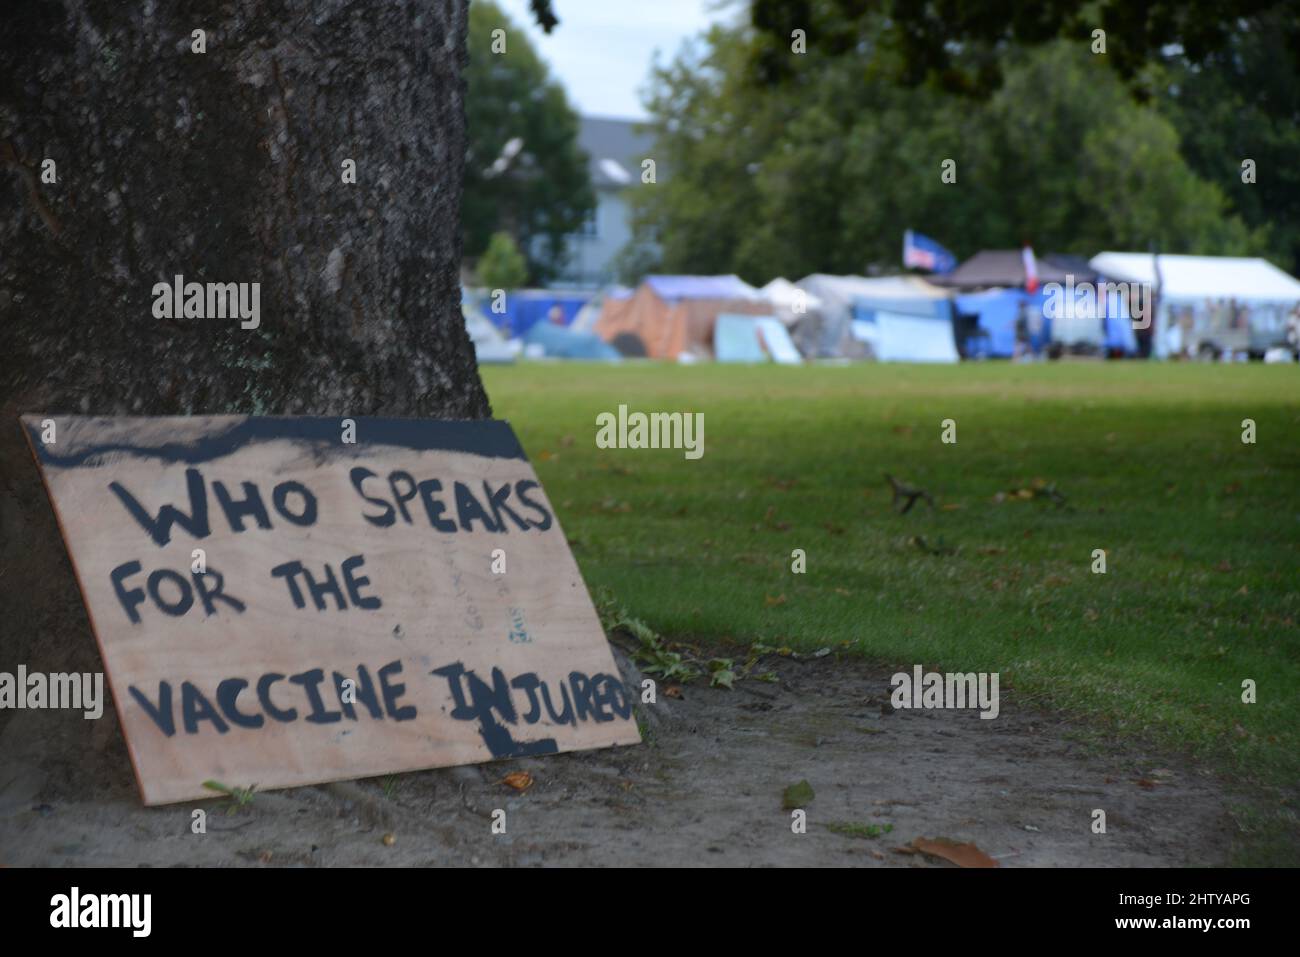 CRISTCHURCH, NEW ZEALAND, FEBRUARY 22, 2022: Signage made by protesters in the Occupy Christchurch movement at Cranmer Square to voice opposition to vaccine mandates. Stock Photo